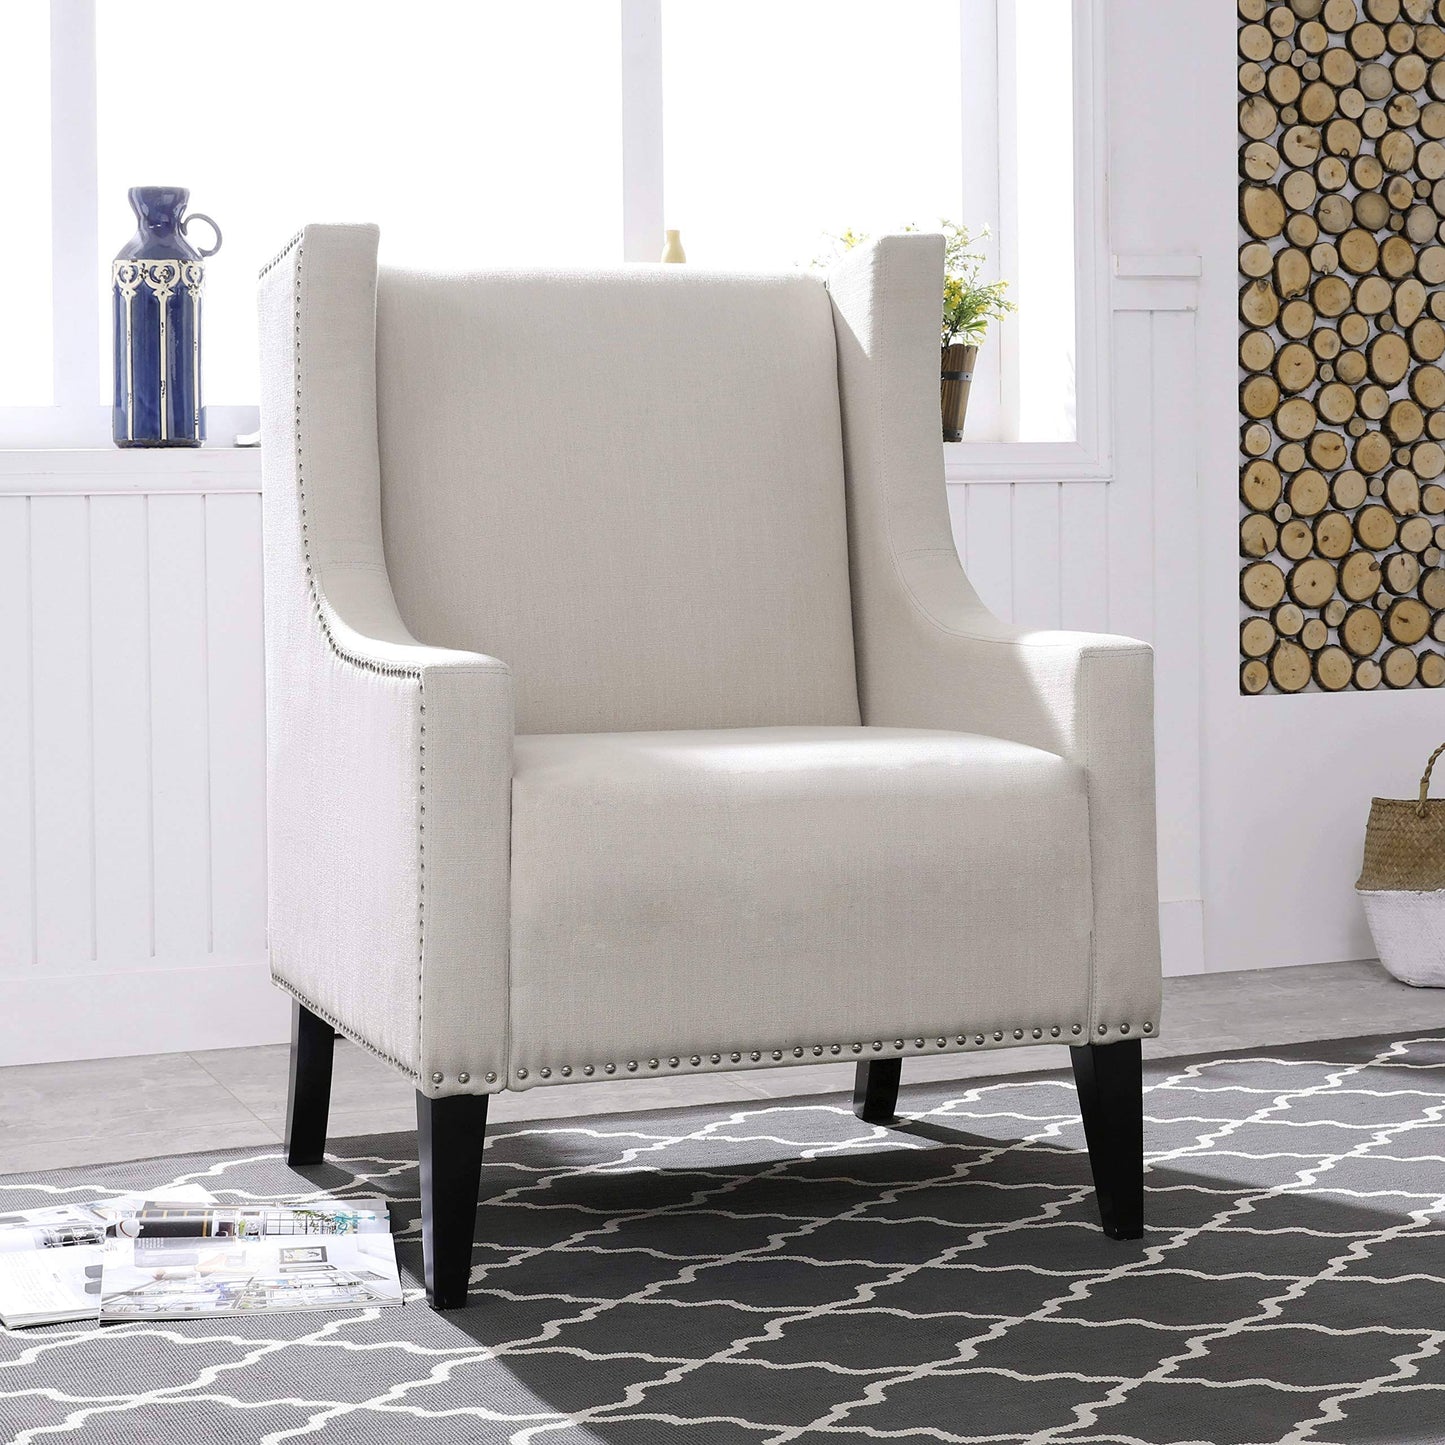 Home Modern Accent Fabric Arm Chair Linen Upholstered Single Sofa With Solid Wood Legs For Living Room